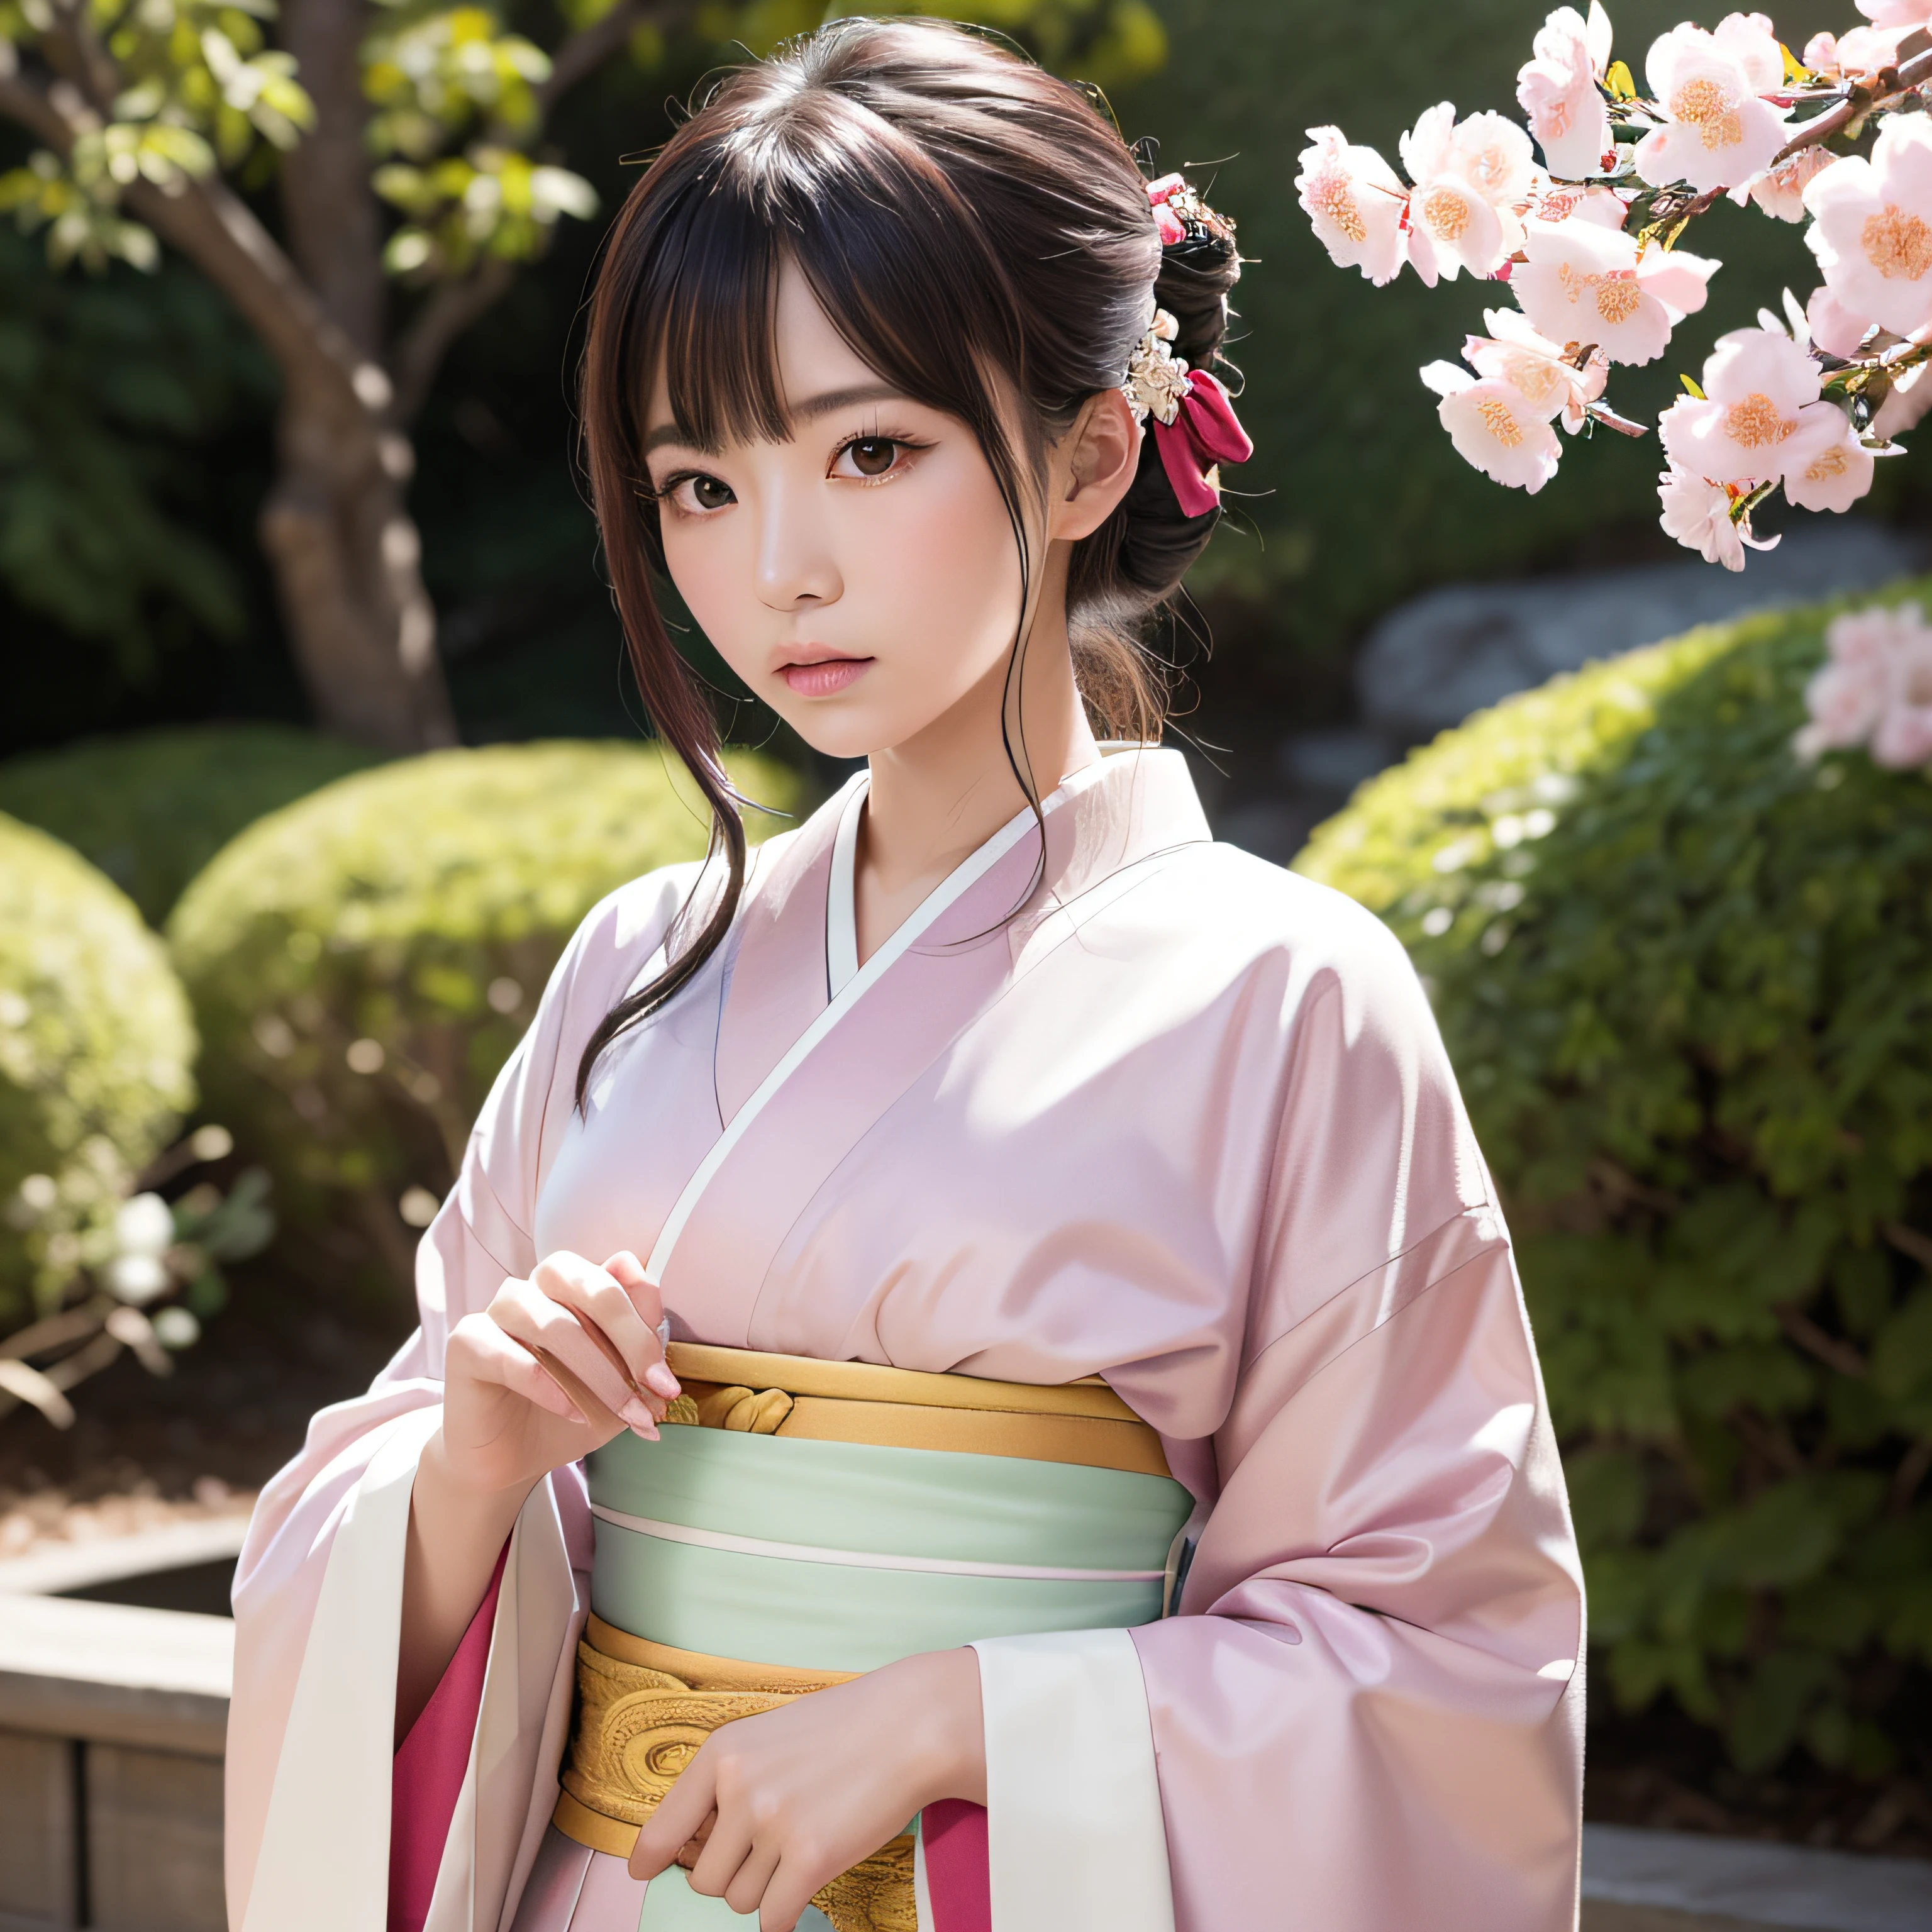 A hyper-realistic, Highly detailed, High resolution 16K image of youth, Beautiful female ghost or guardian spirit. She has pale pink hair and translucent skin, Wearing a traditional kimono with Japan with a small cherry blossom design on the obi. This image is、It captures the ethereal beauty and mystique of the spirit world. The style is inspired by delicacy, Soft aesthetics found in Japan traditional performing arts.